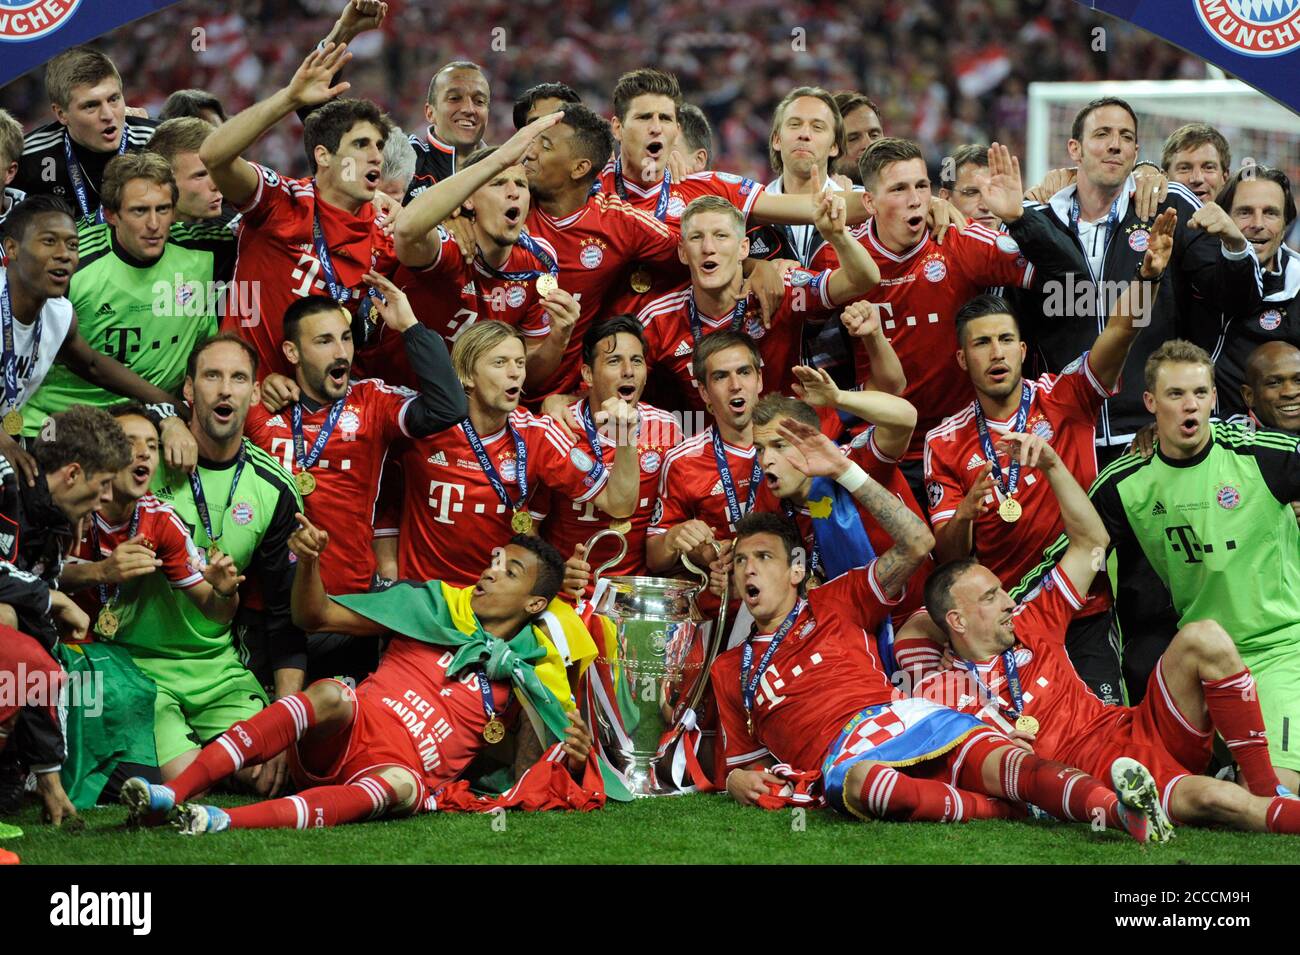 Team, team, team photo, team photo, winner photo, preview of the 2020  Champions League final Paris St.Germain-FC Bayern Munich on 08/23/2020.  Archive photo; Bayern, winner, winner, trophy, trophy, cup, award ceremony,  football